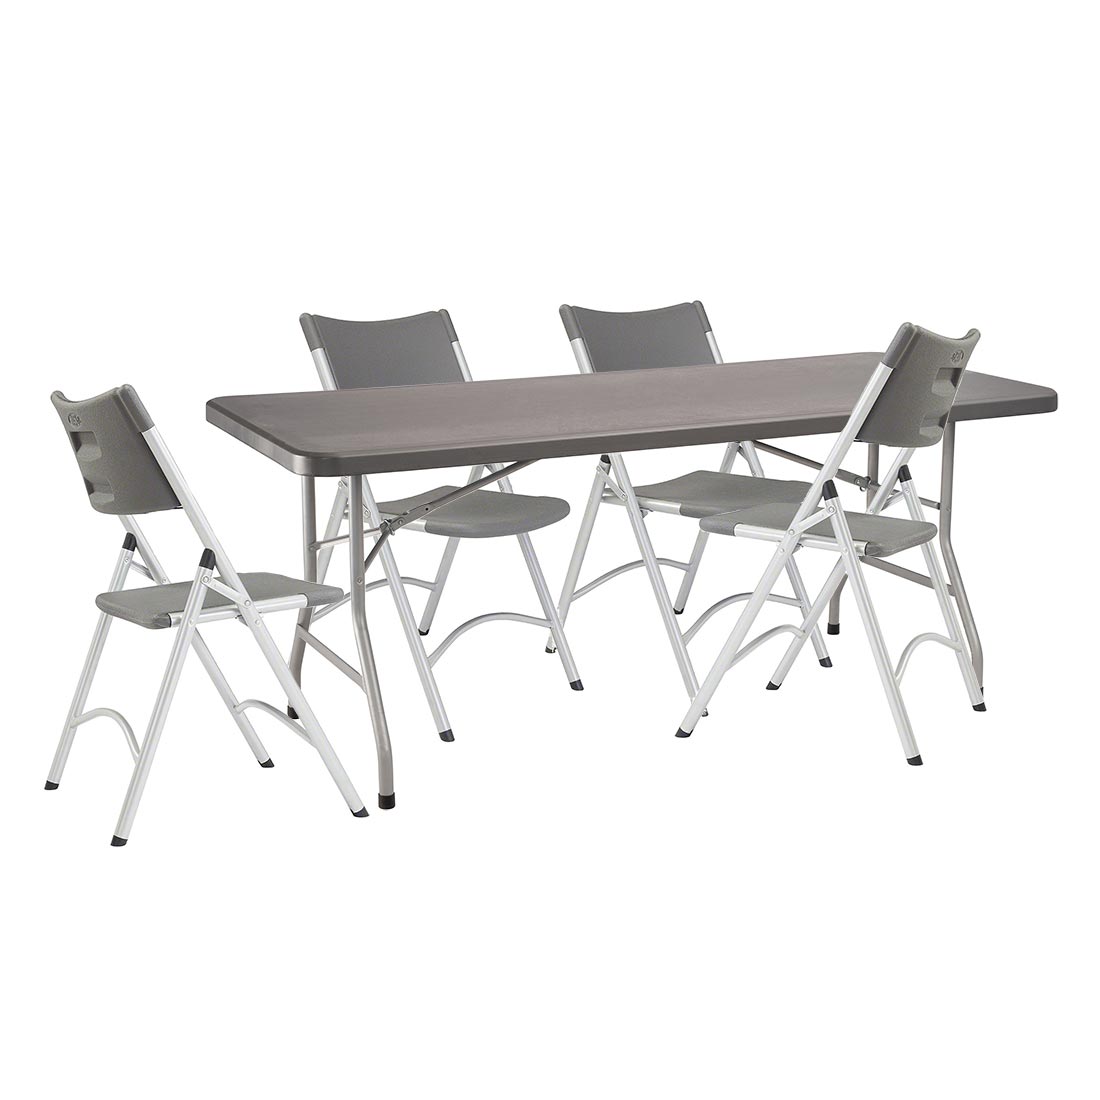 NPS® 30x72 Folding Table & Chairs Package, Charcoal